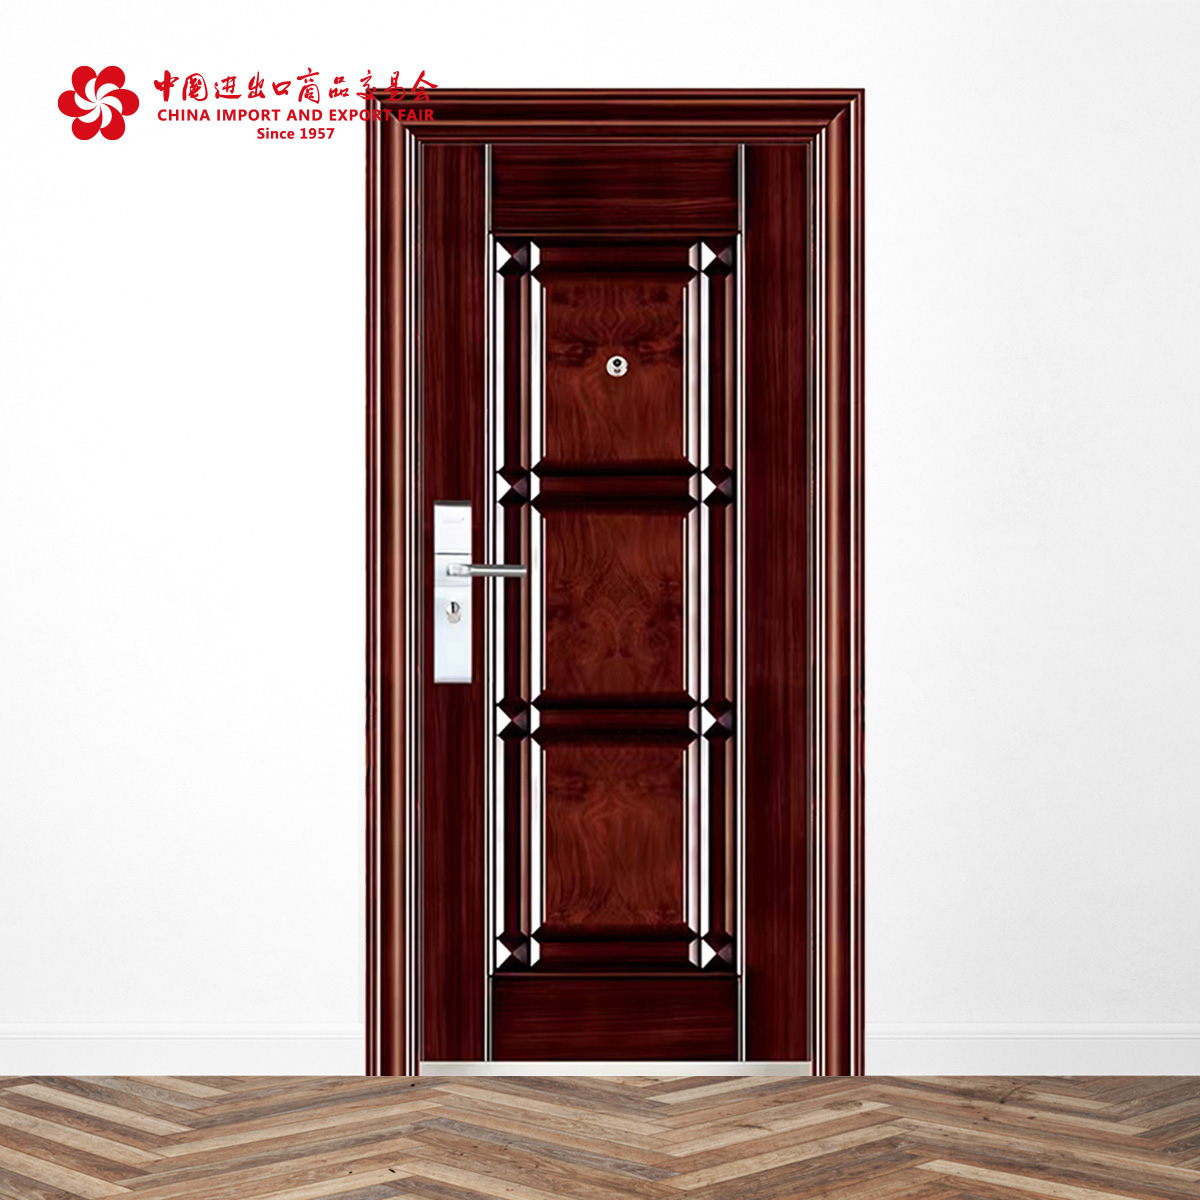 The steel security doors of Anhui Haotian Doors and Windows Co., Ltd. are designed with multiple locking points and excellent anti-prying performance. If you are interested in the company, please visit their store on the #CantonFairOnlinePlatform: cantonfair.org.cn/zh-CN/shops/58…